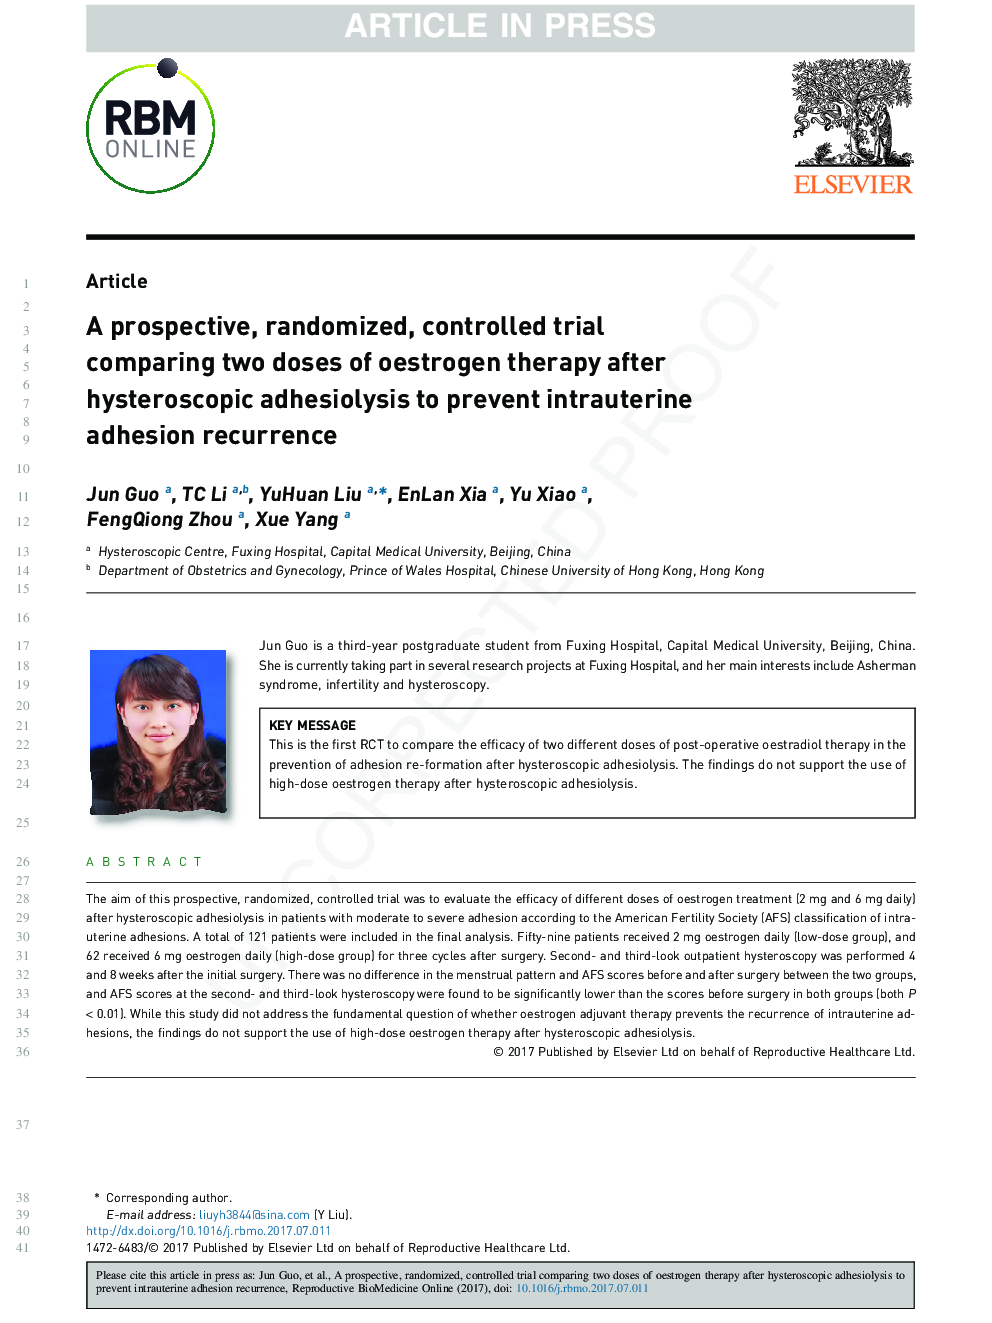 A prospective, randomized, controlled trial comparing two doses of oestrogen therapy after hysteroscopic adhesiolysis to prevent intrauterine adhesion recurrence